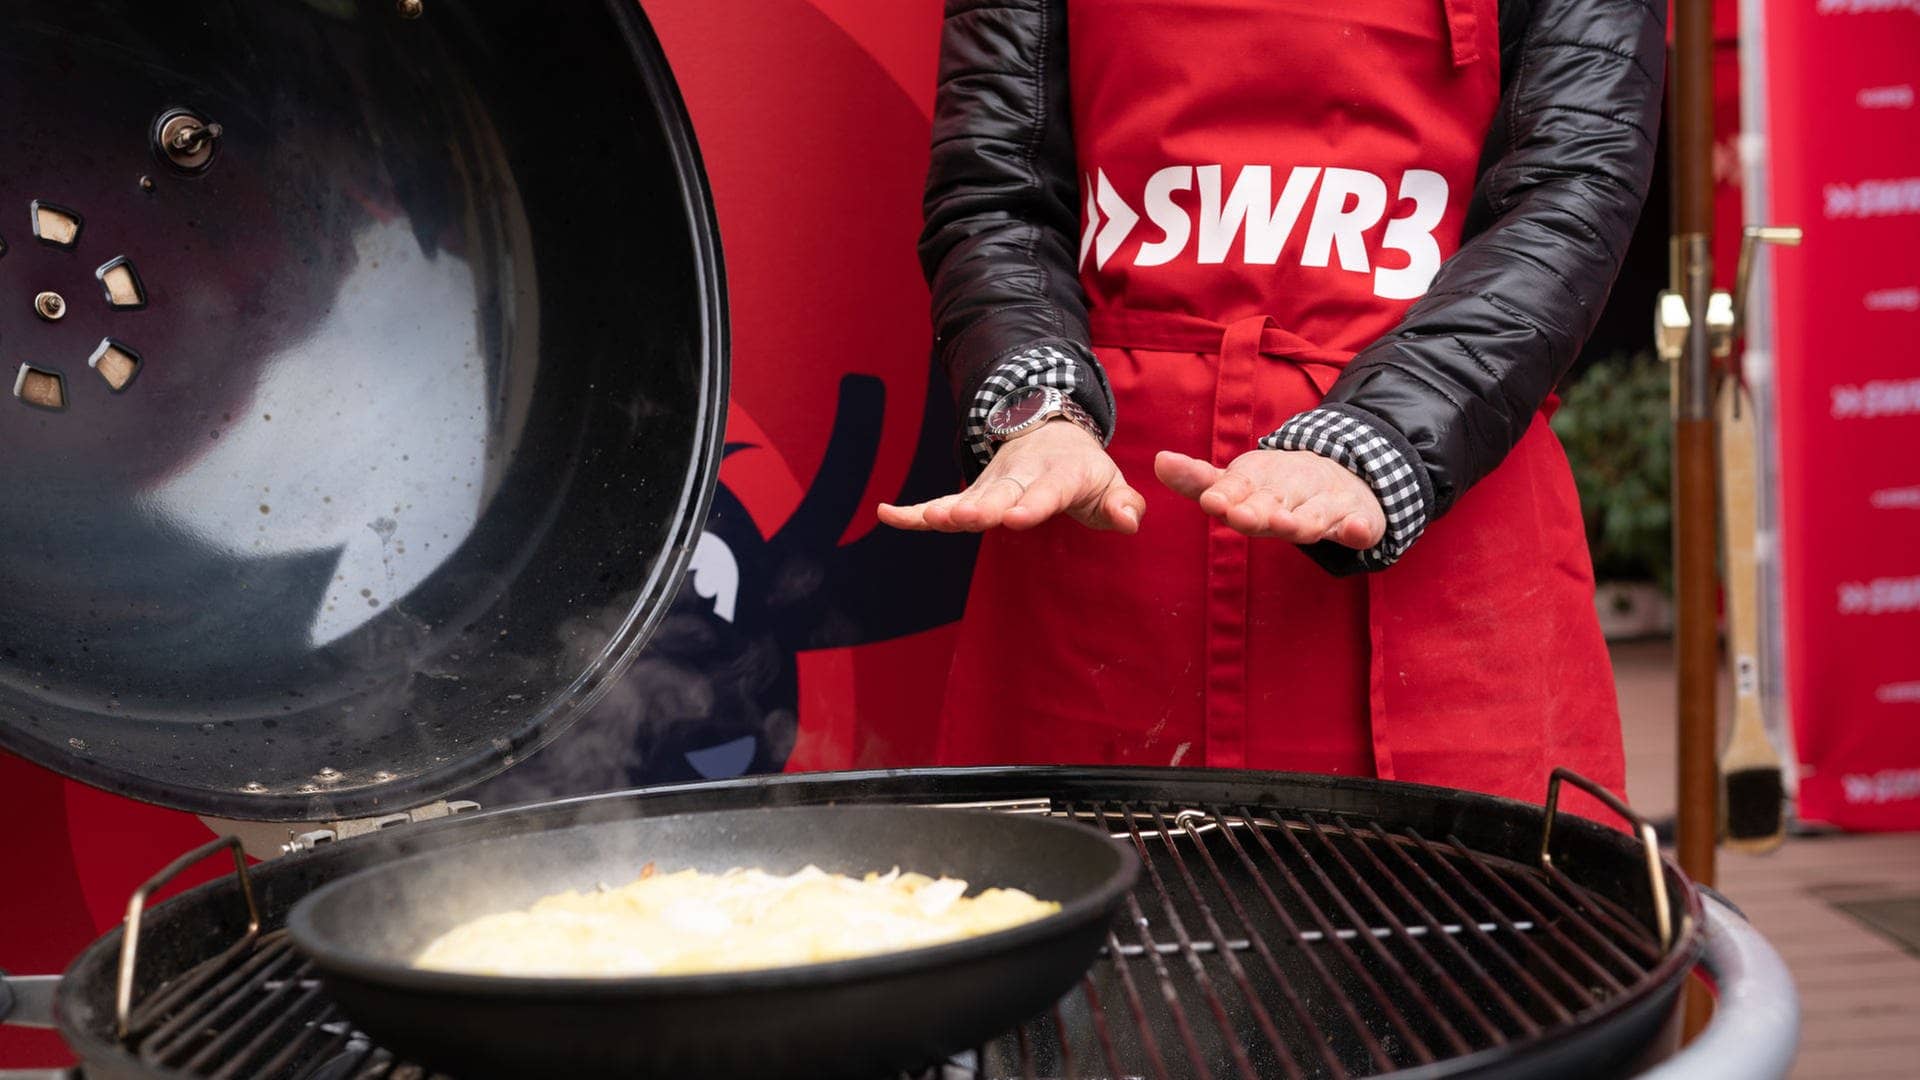 SWR3 Grillparty: Vorspeise